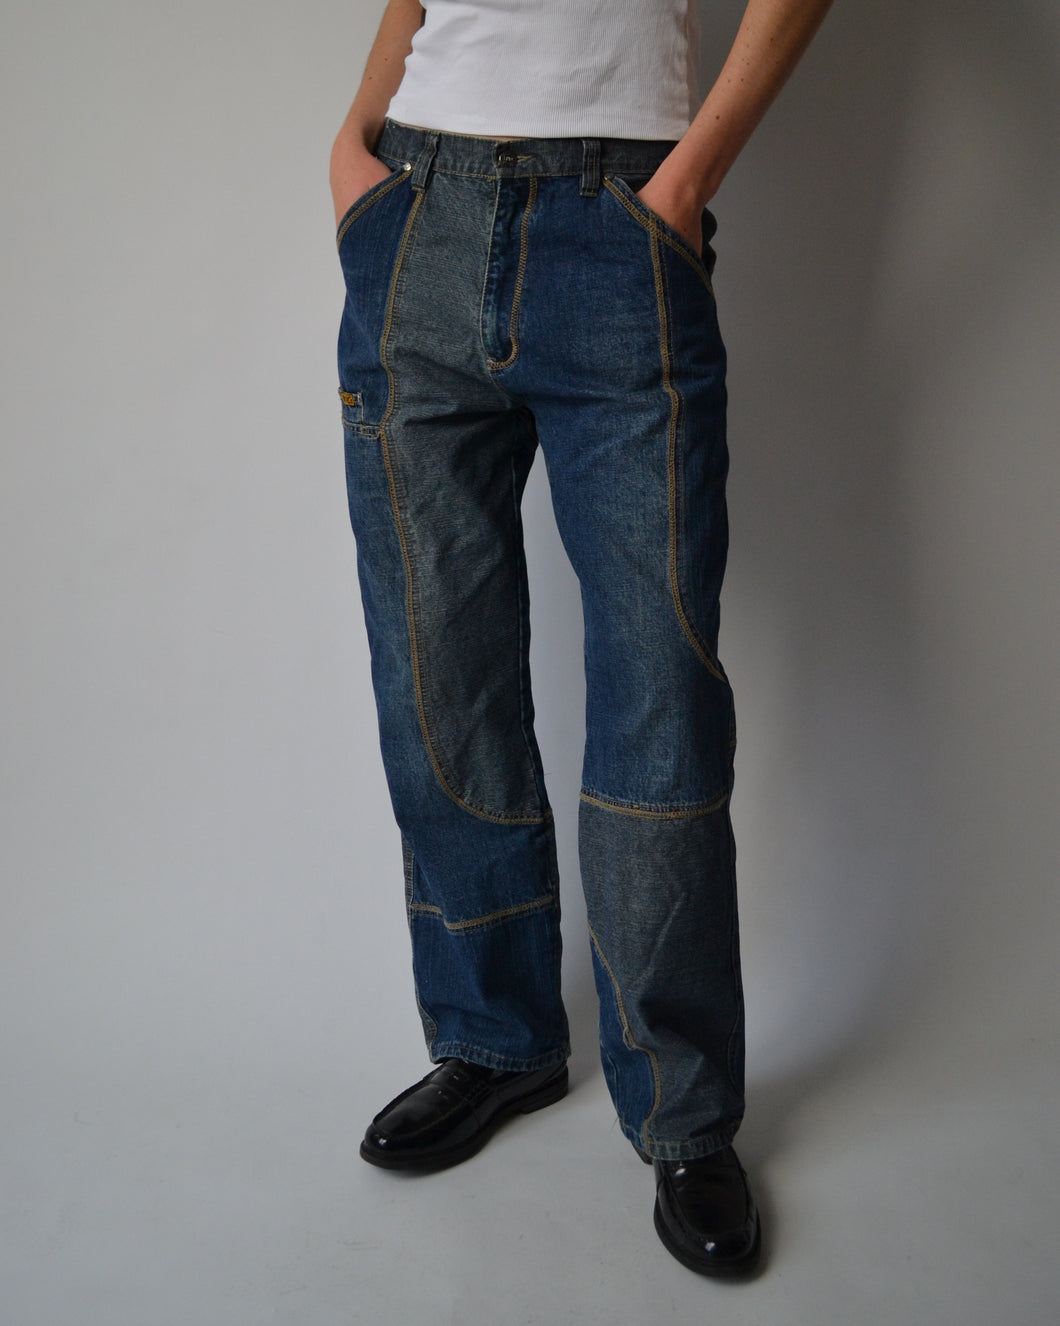 Contrast Stitching Jeans